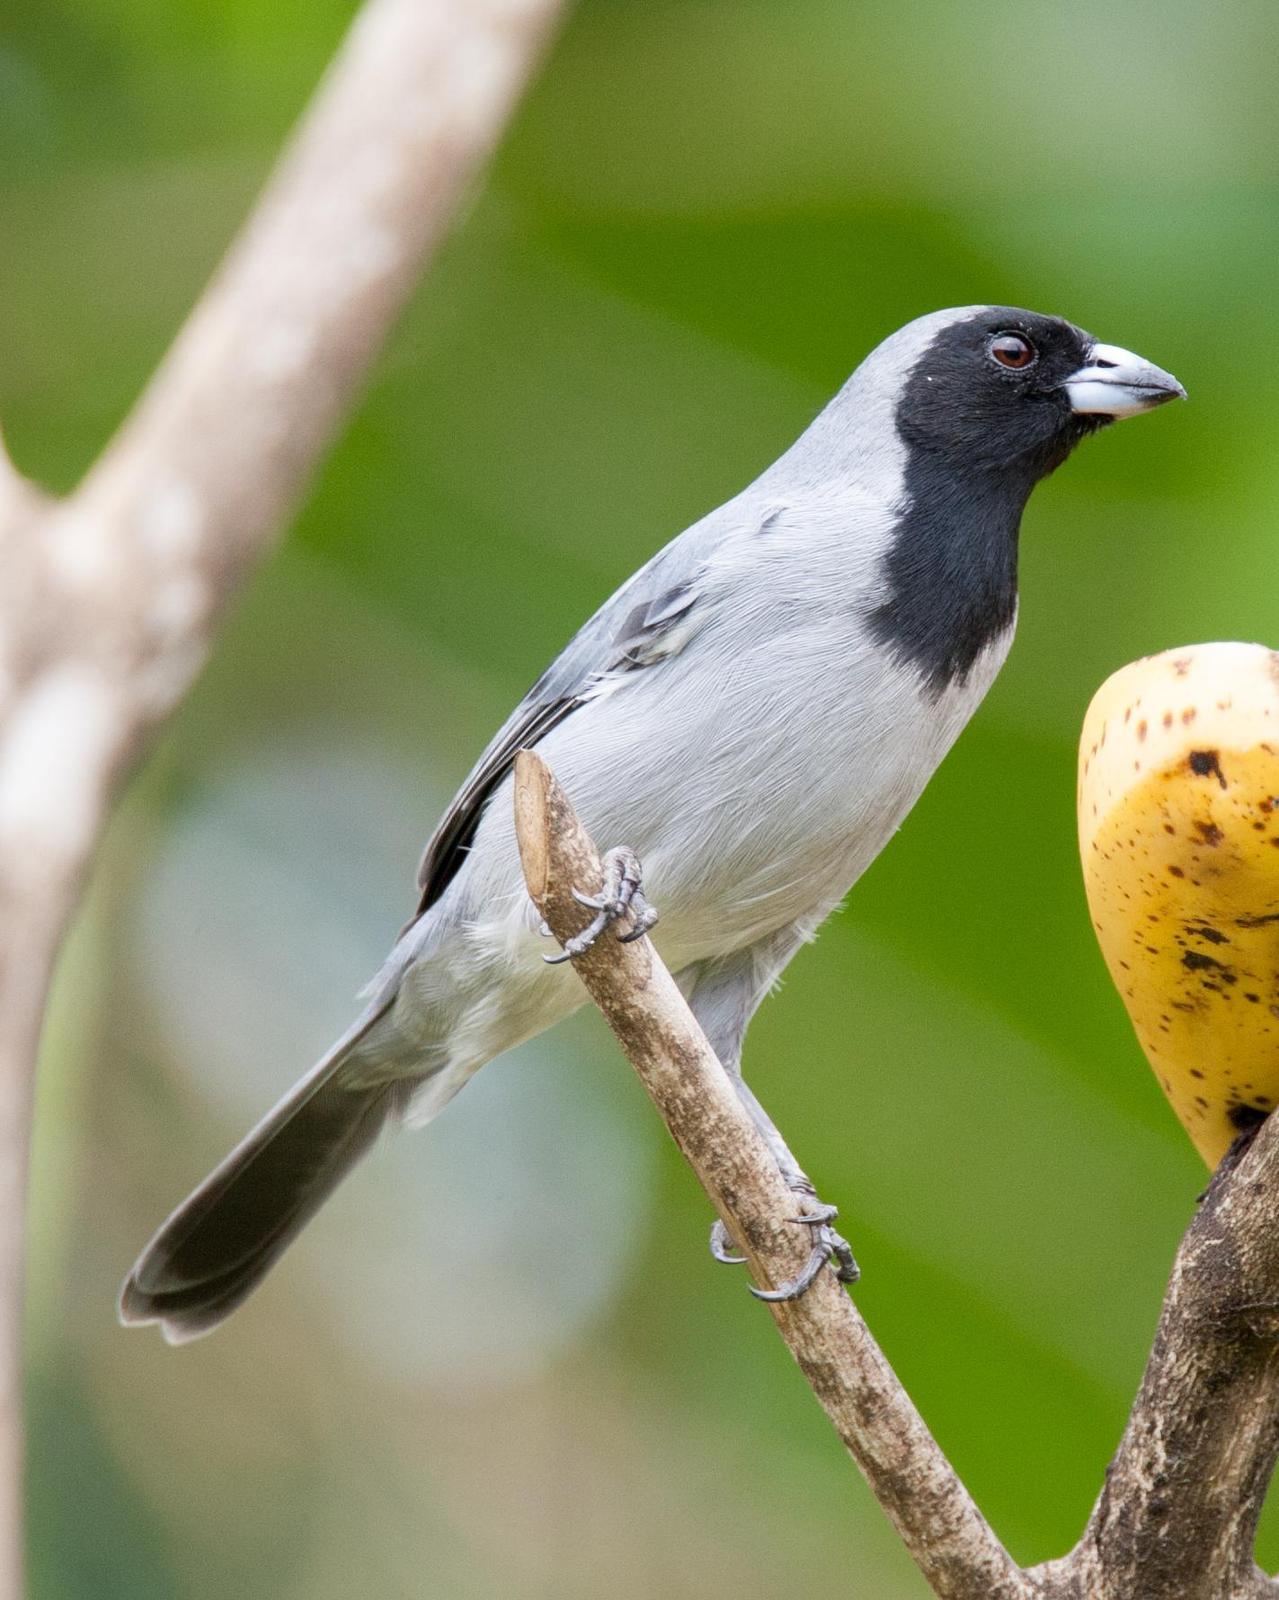 Black-faced Tanager Photo by Robert Lewis